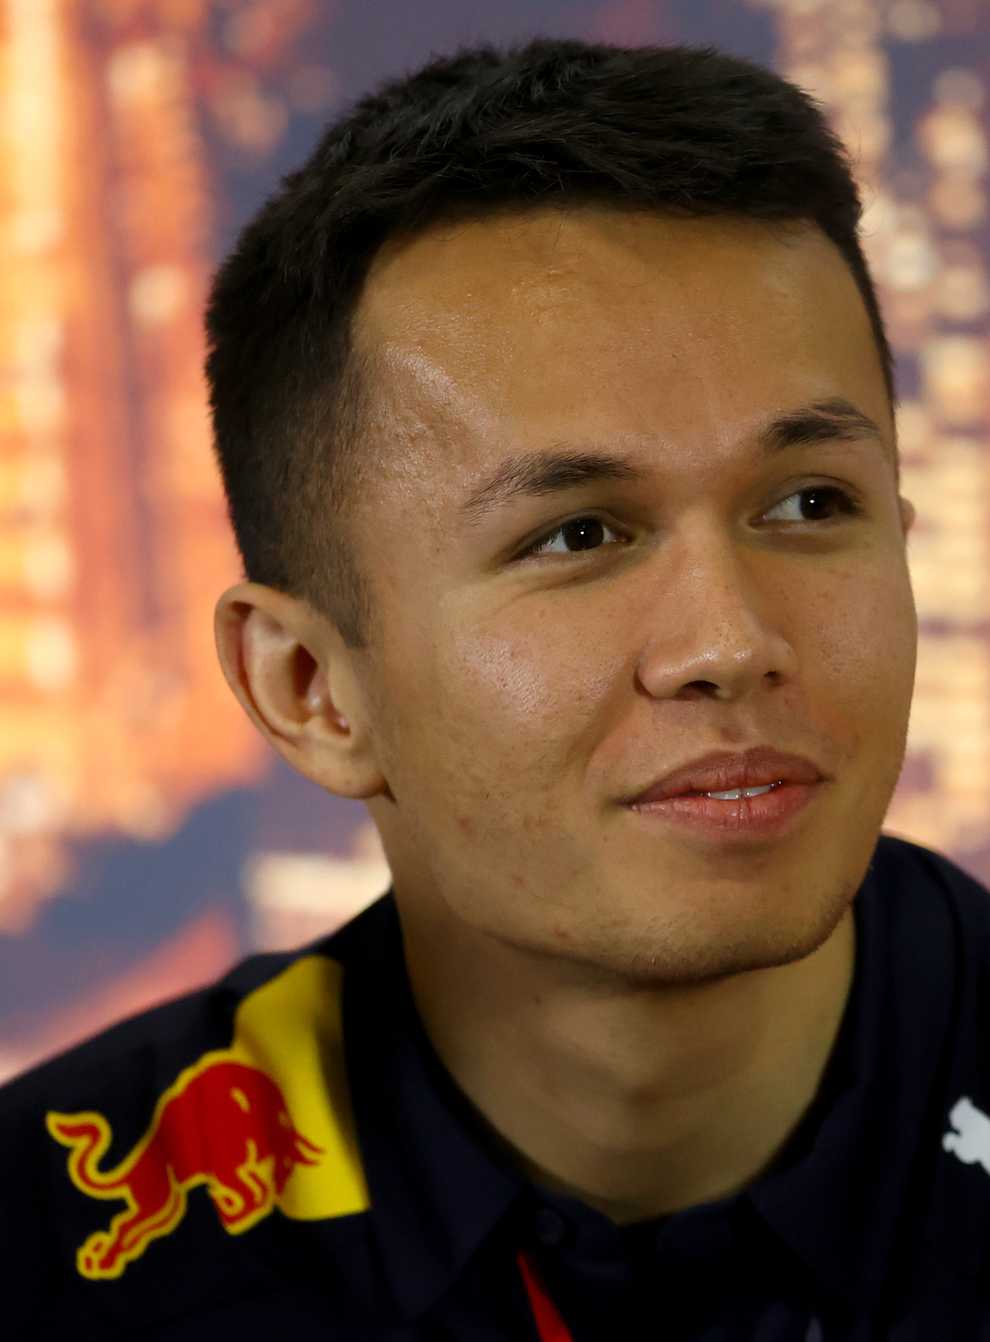 Alexander Albon has been dropped by Red Bull for 2021